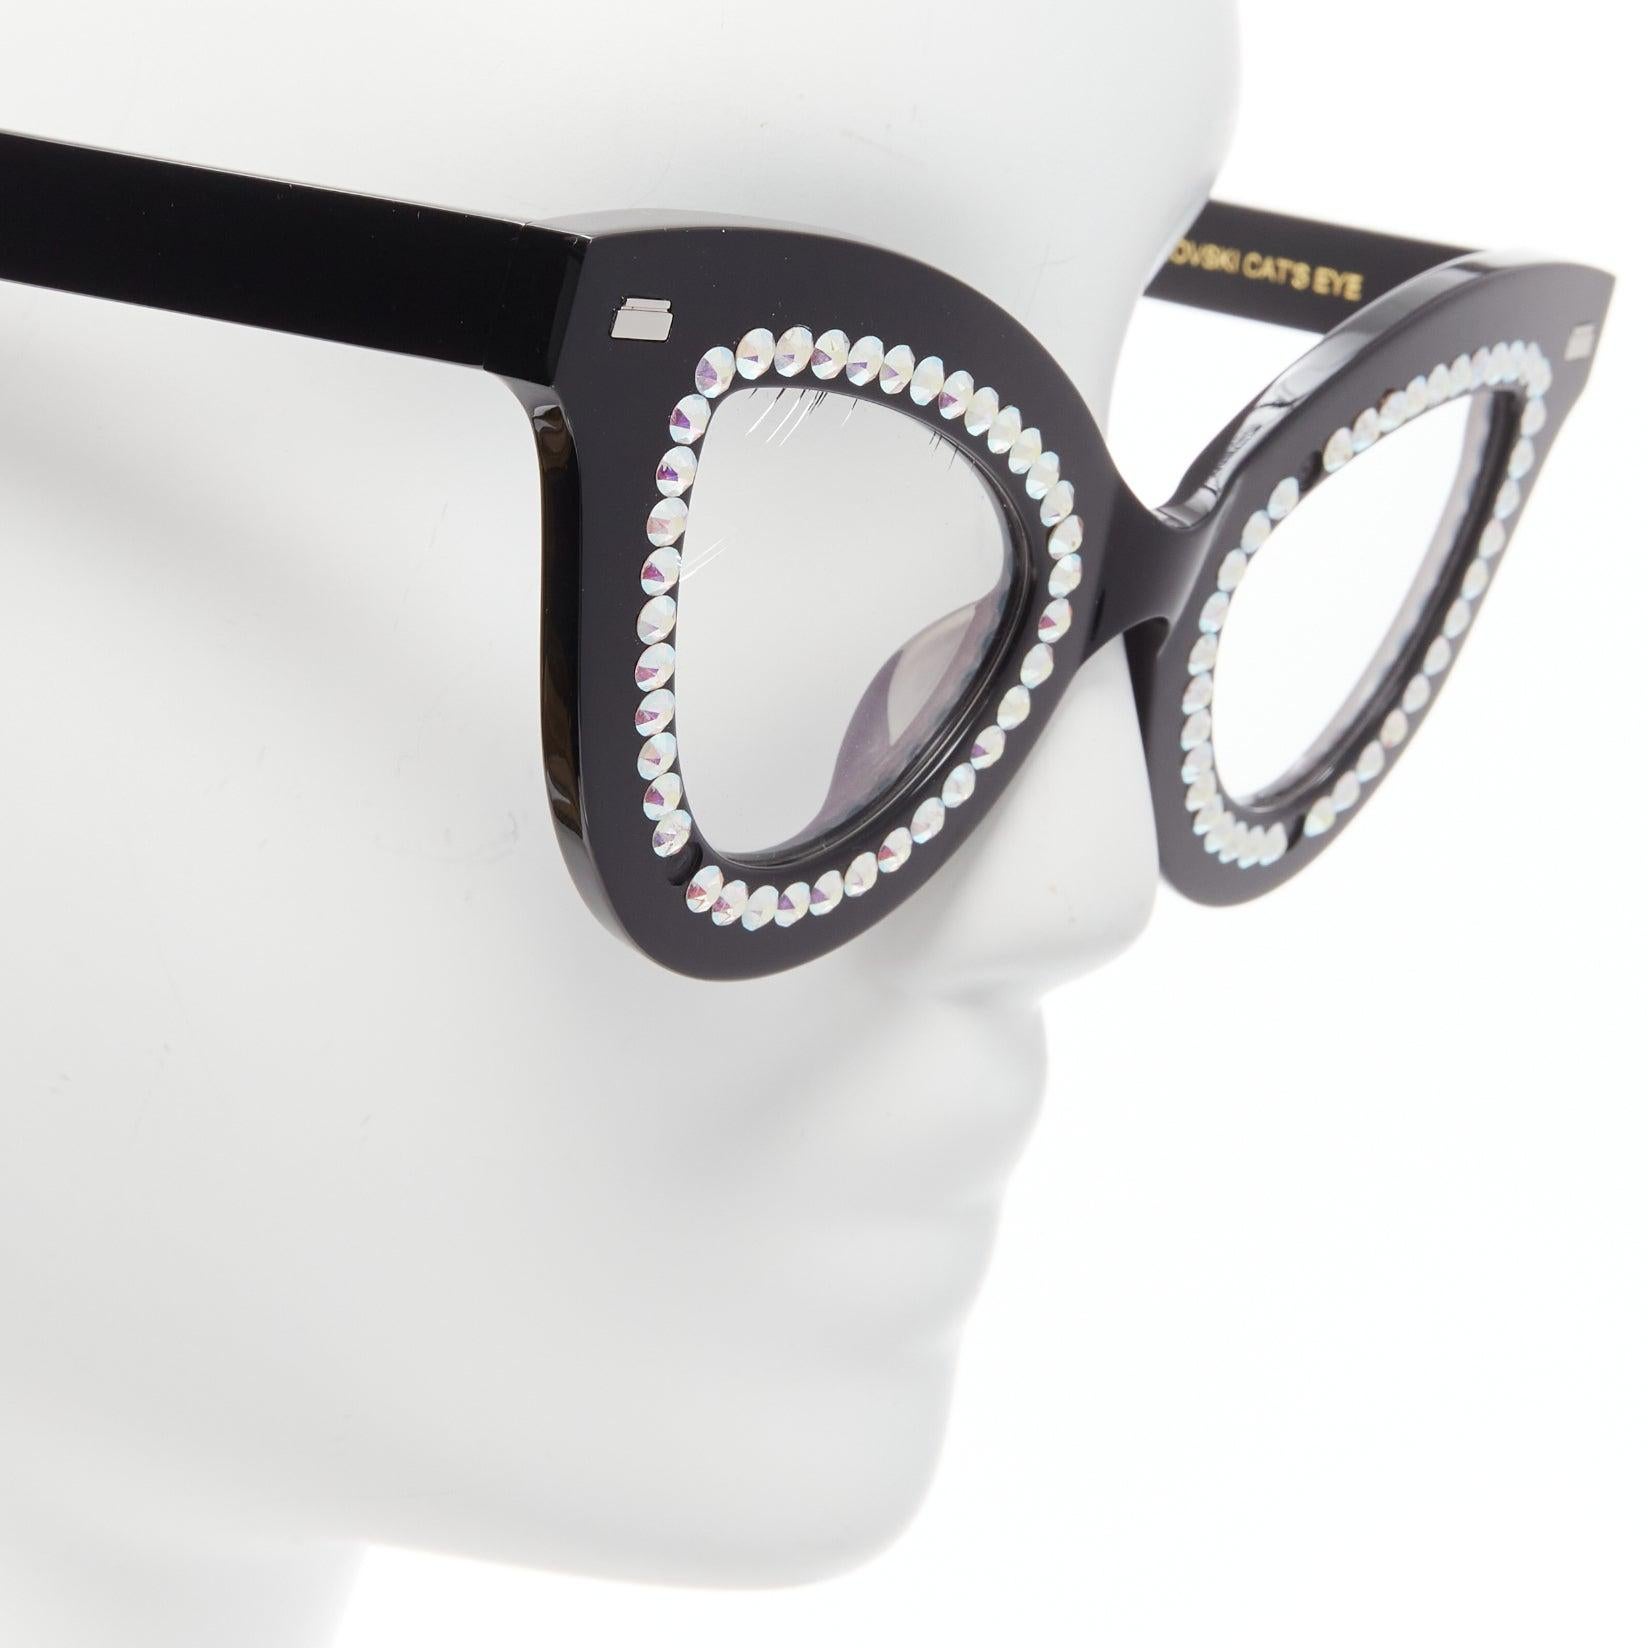 GENTLE MONSTER Pushbutton Swarovski Cat Eye black crystal sunglasses
Reference: BSHW/A00090
Brand: Gentle Monster
Model: Swarovski Cats Eye
Collection: Pushbutton
Material: Acetate
Color: Black, Pearl
Pattern: Solid
Closure: Pull On
Lining: Black